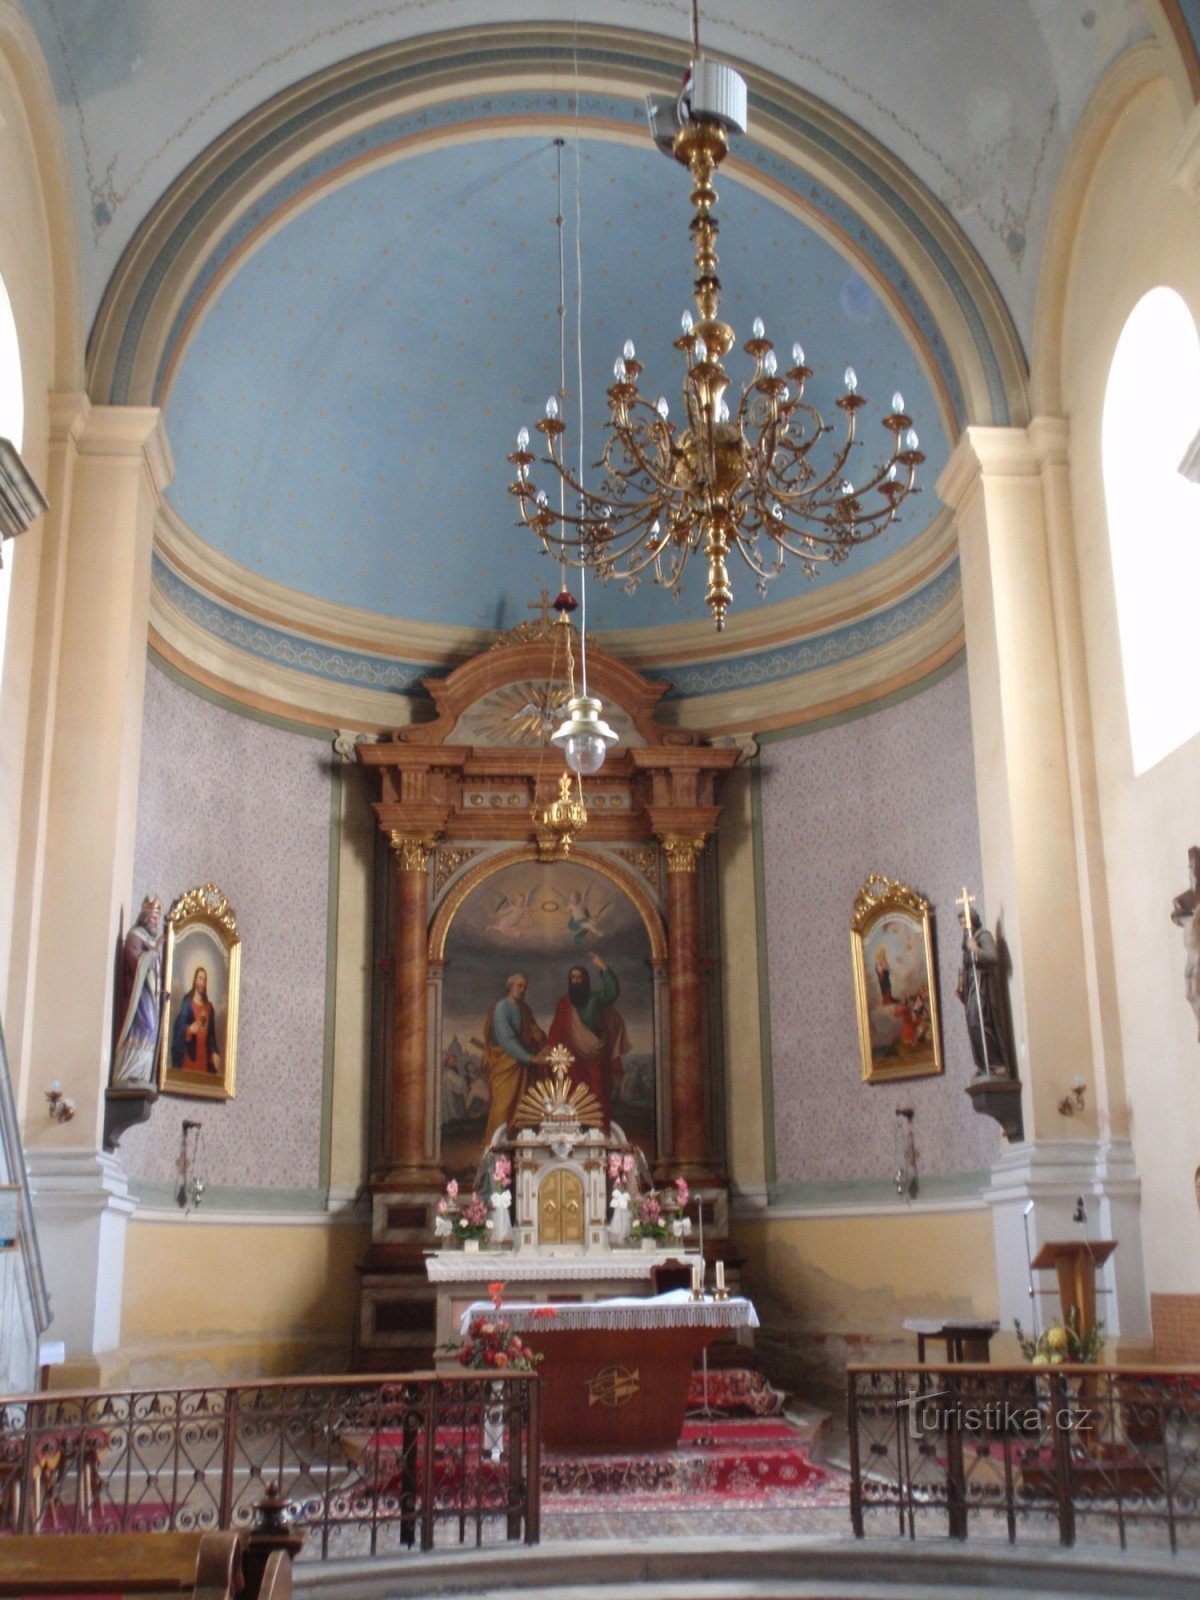 Dolní Kounice, church of St. Peter and Paul - interior